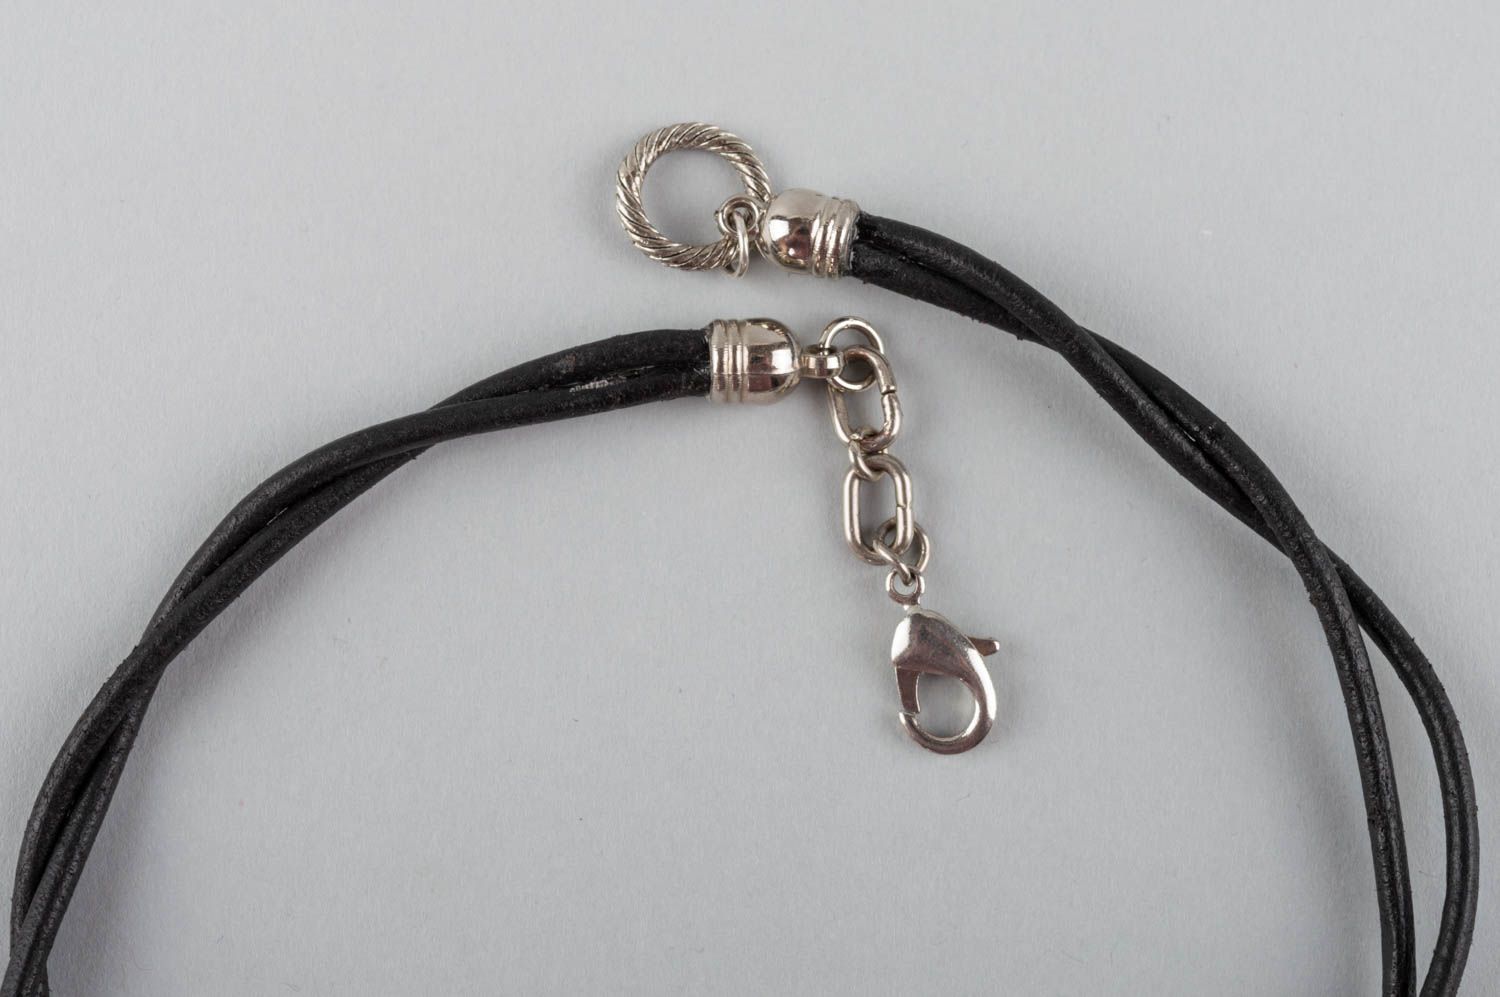 Necklace with natural stones on leather cord stylish handmade accessory photo 3